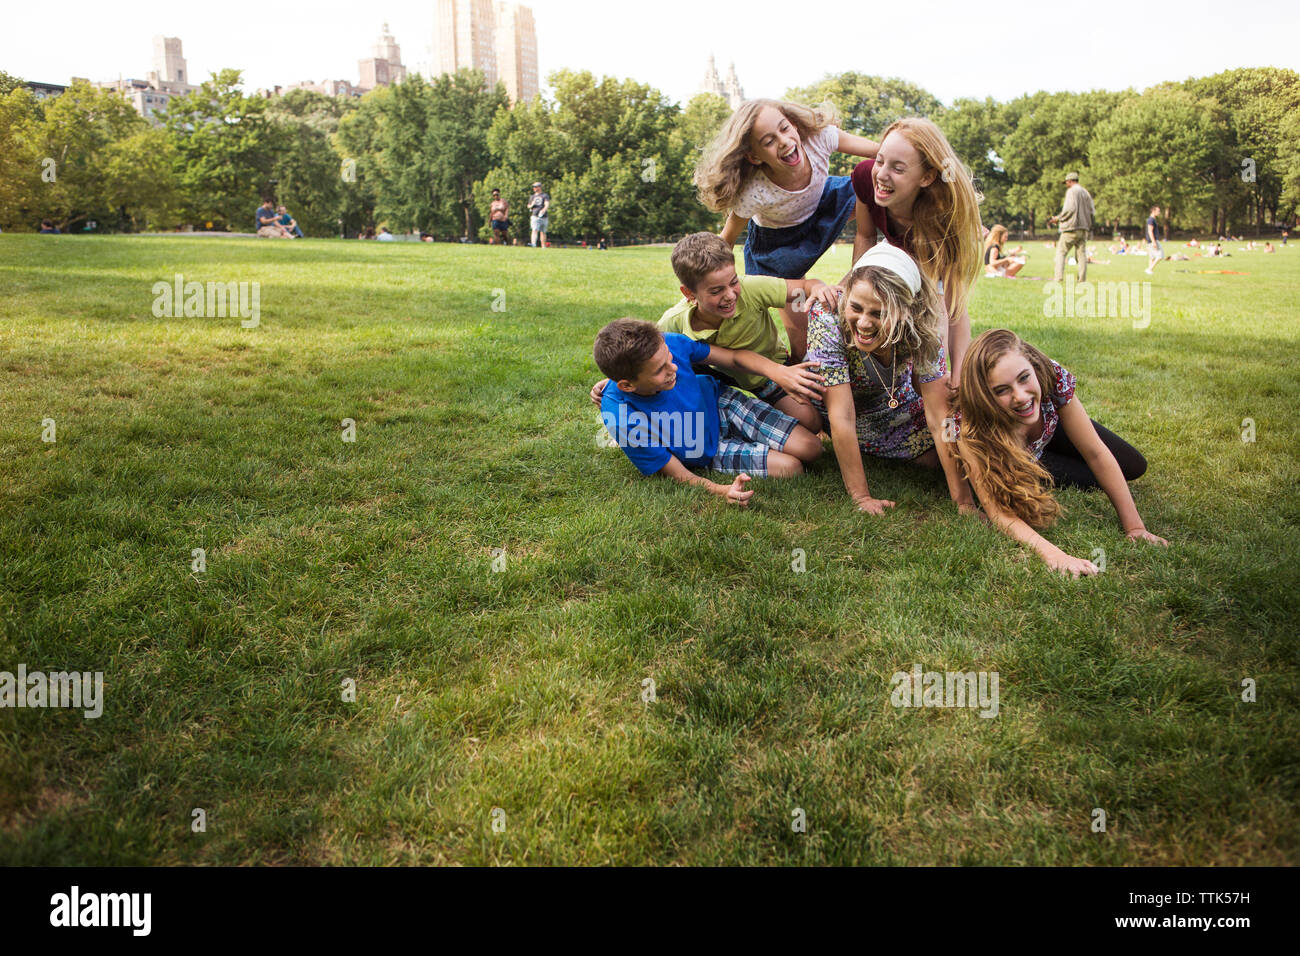 Children enjoying with mother on grassy field at park Stock Photo